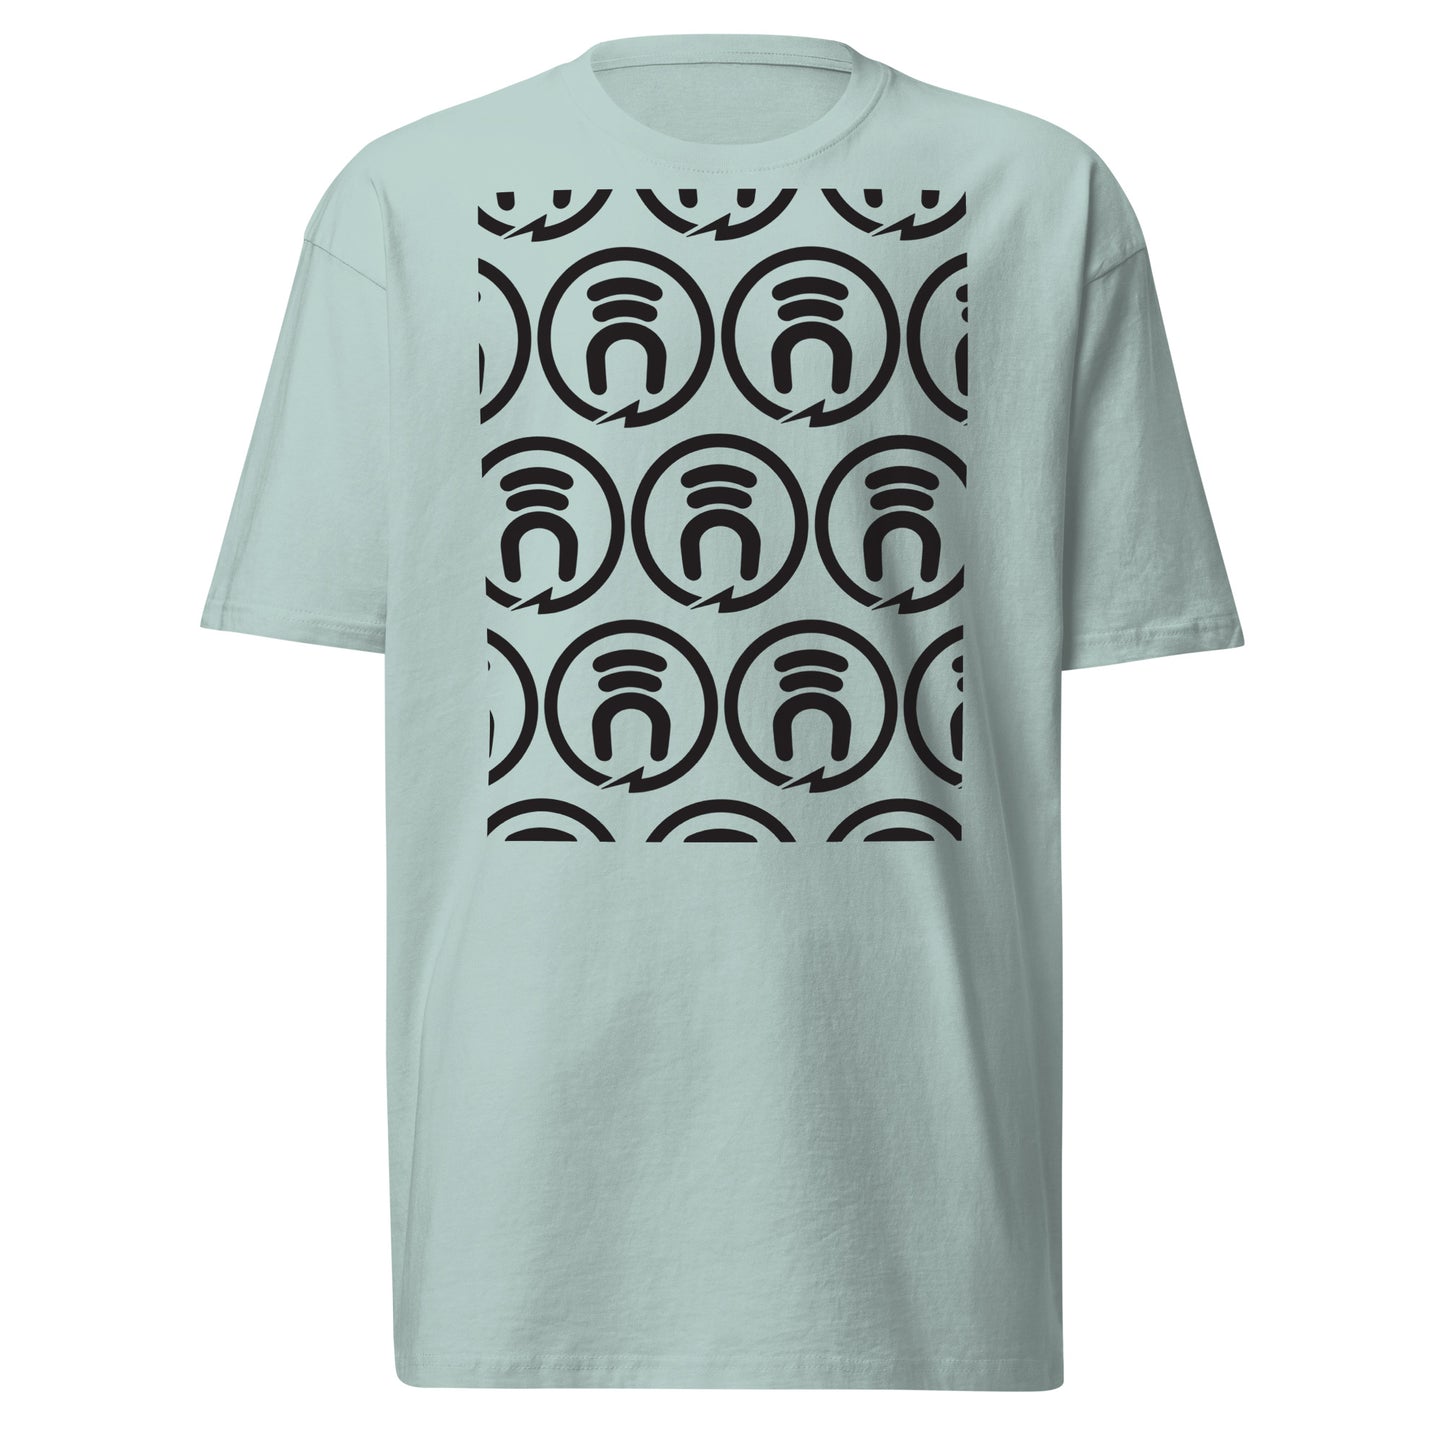 induktiv Circle Logo (repeated) premium heavyweight tee SHIPPING INCLUDED IN PRICING